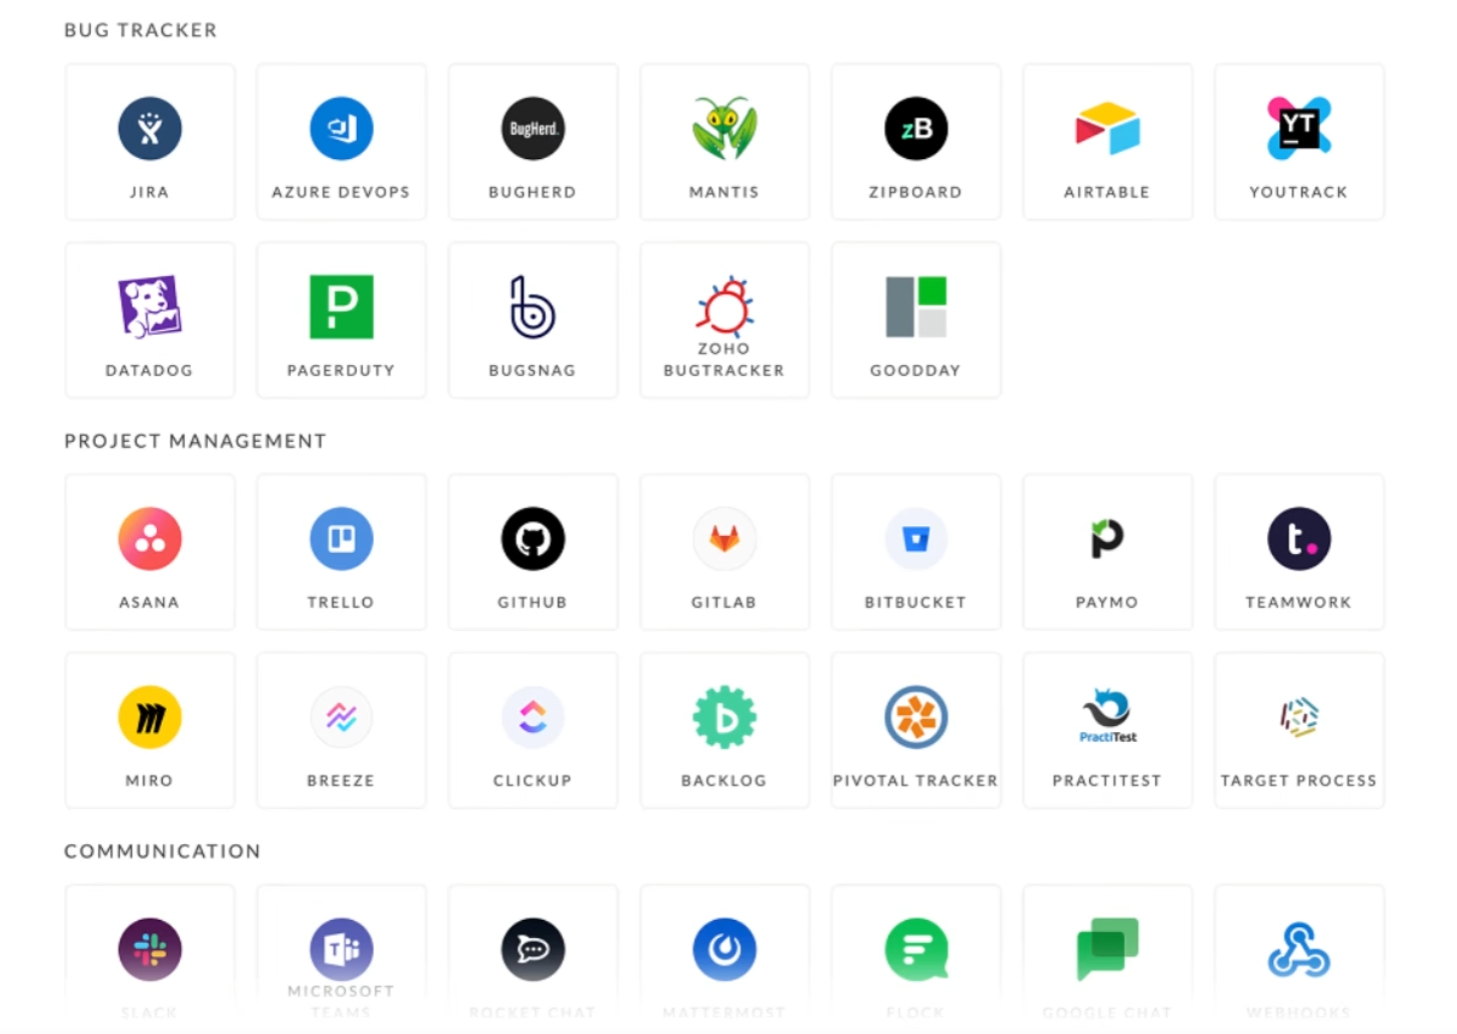 Integration options, presented as a grid of icons